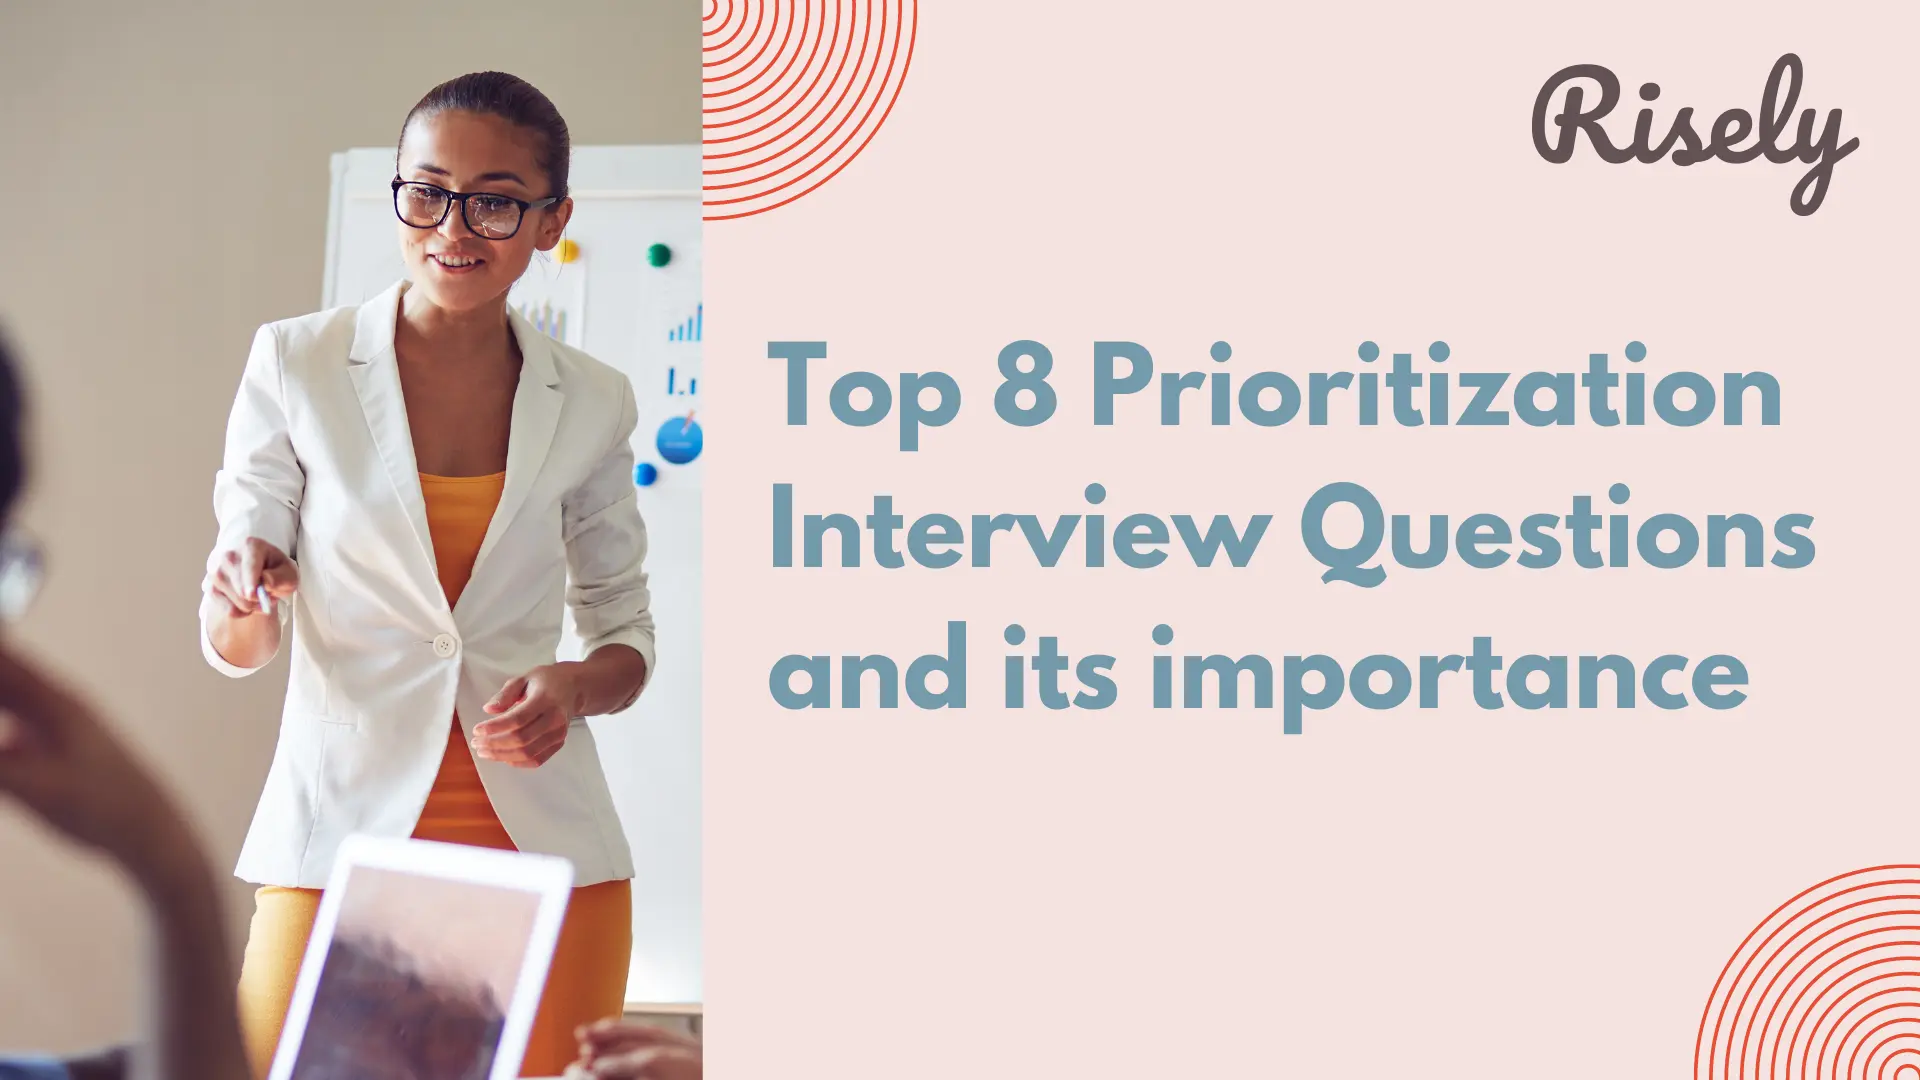 Top 8 prioritization interview questions and its importance